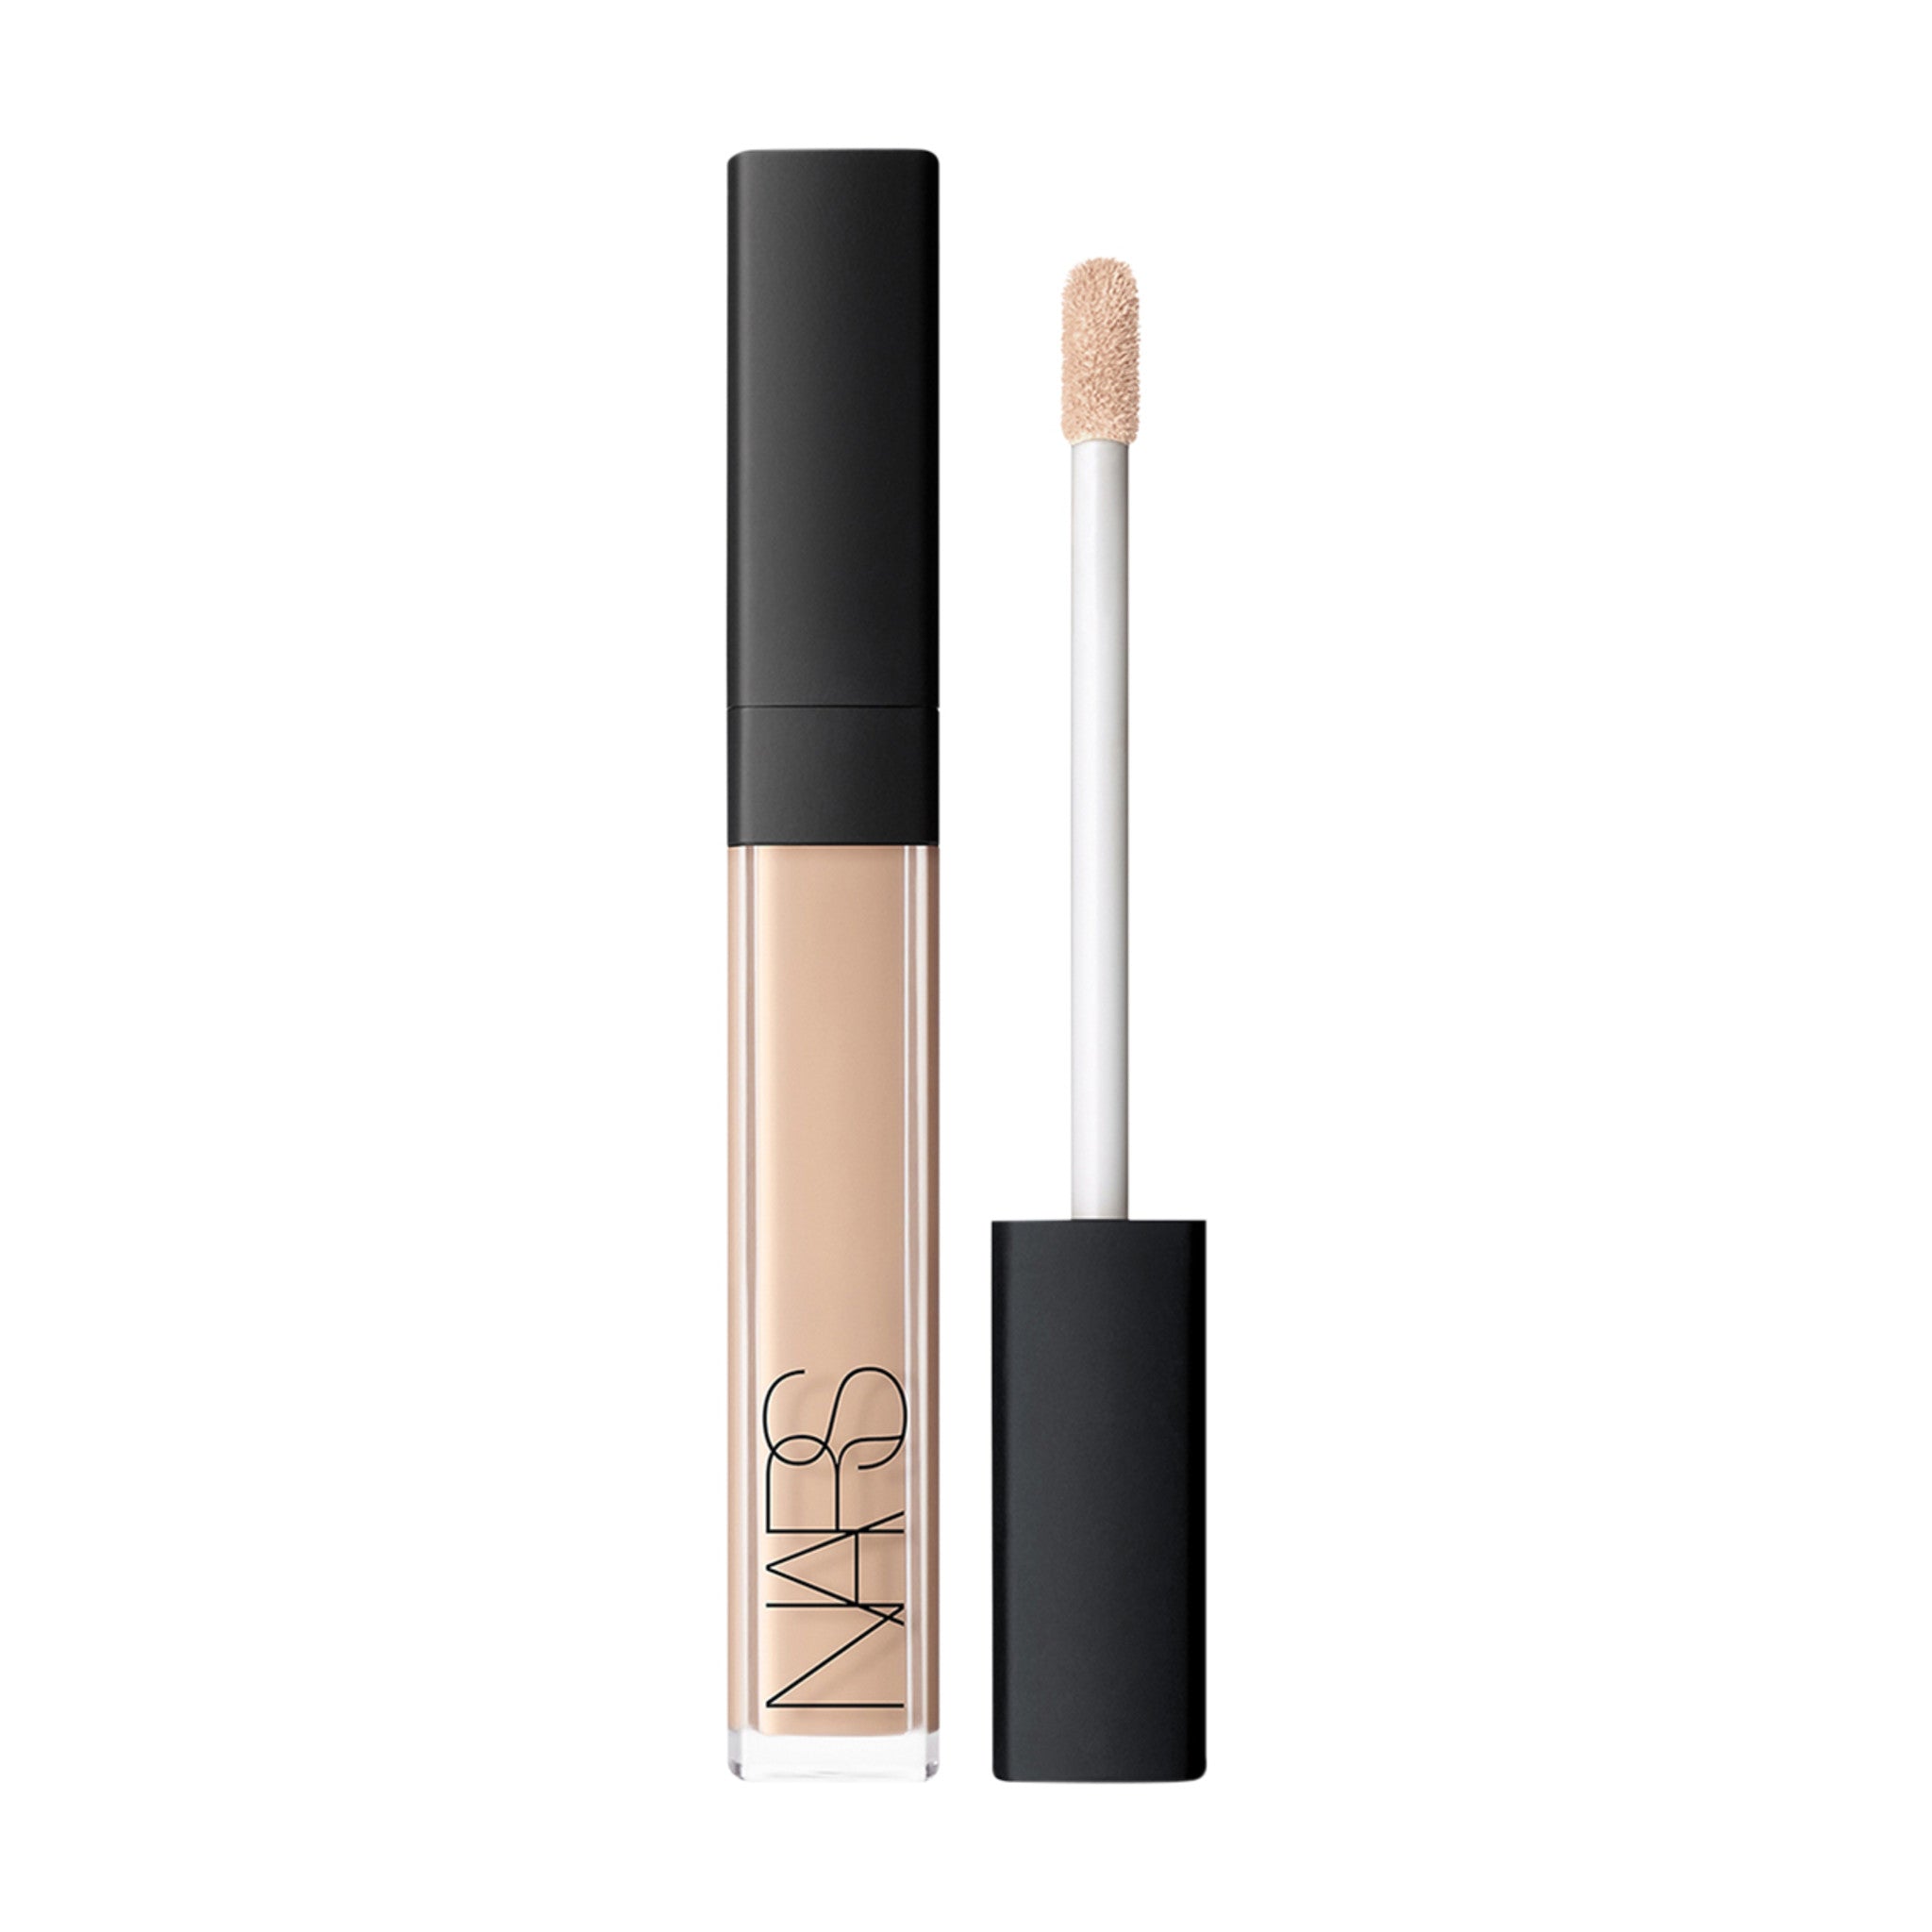 Nars Radiant Creamy Concealer Color/Shade variant: Vanilla L2 main image. This product is for light neutral complexions